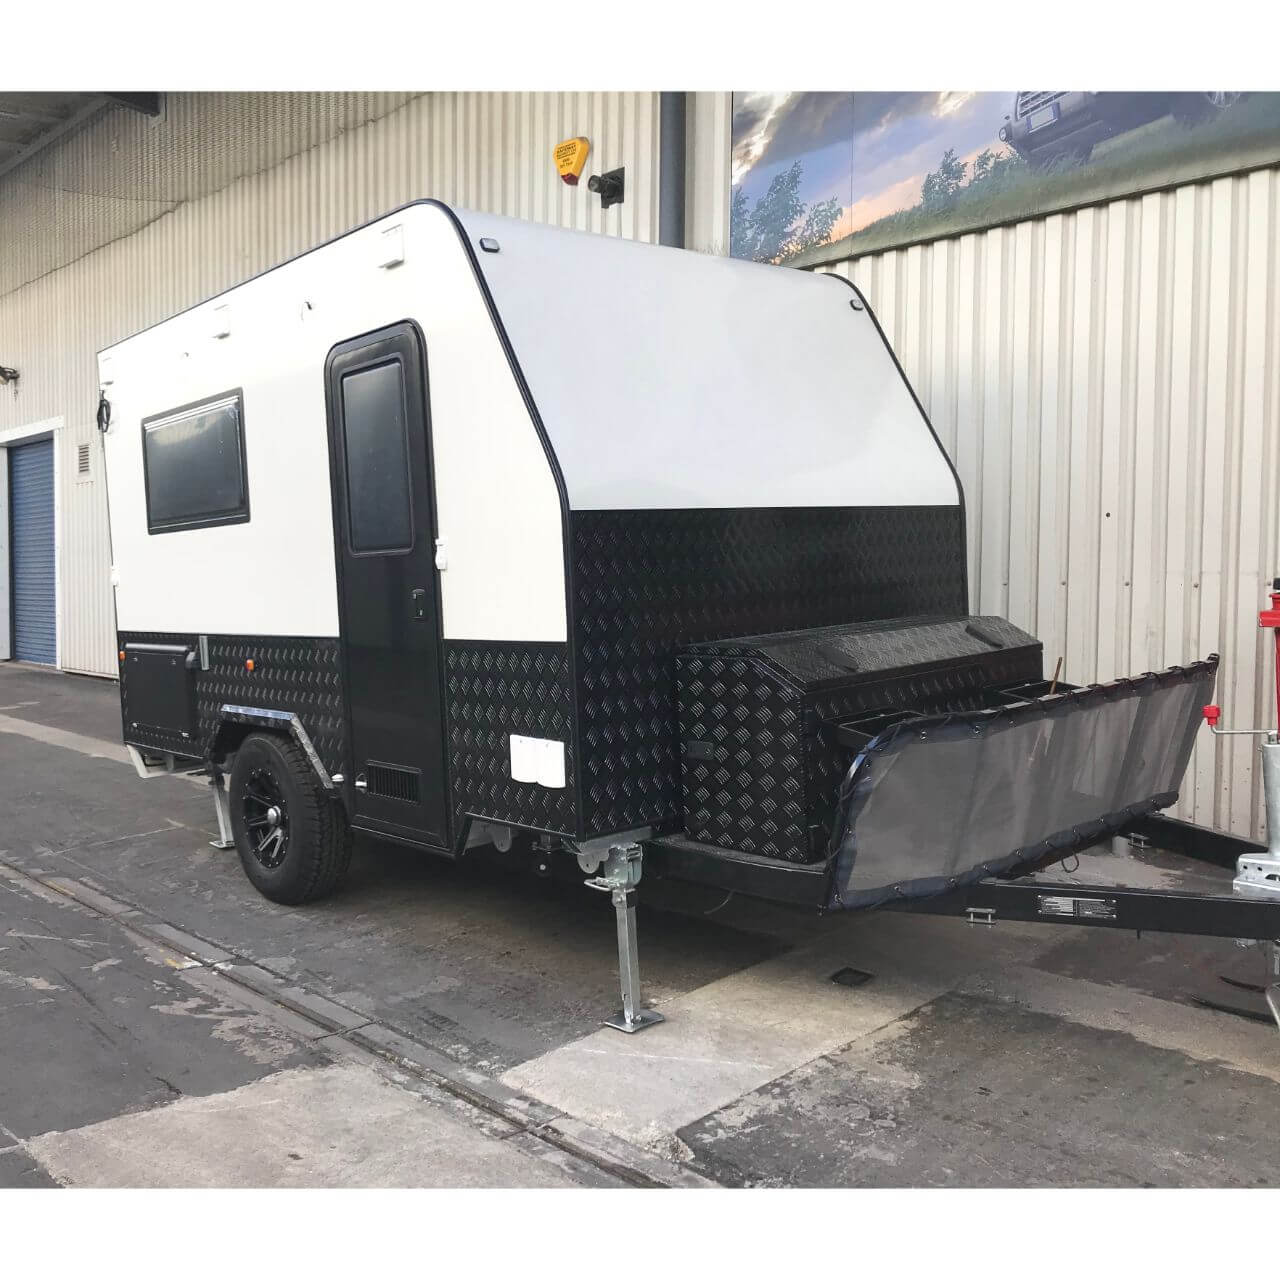 4 Berth Off-Roading Overland Expedition Caravan -  - sold by Direct4x4